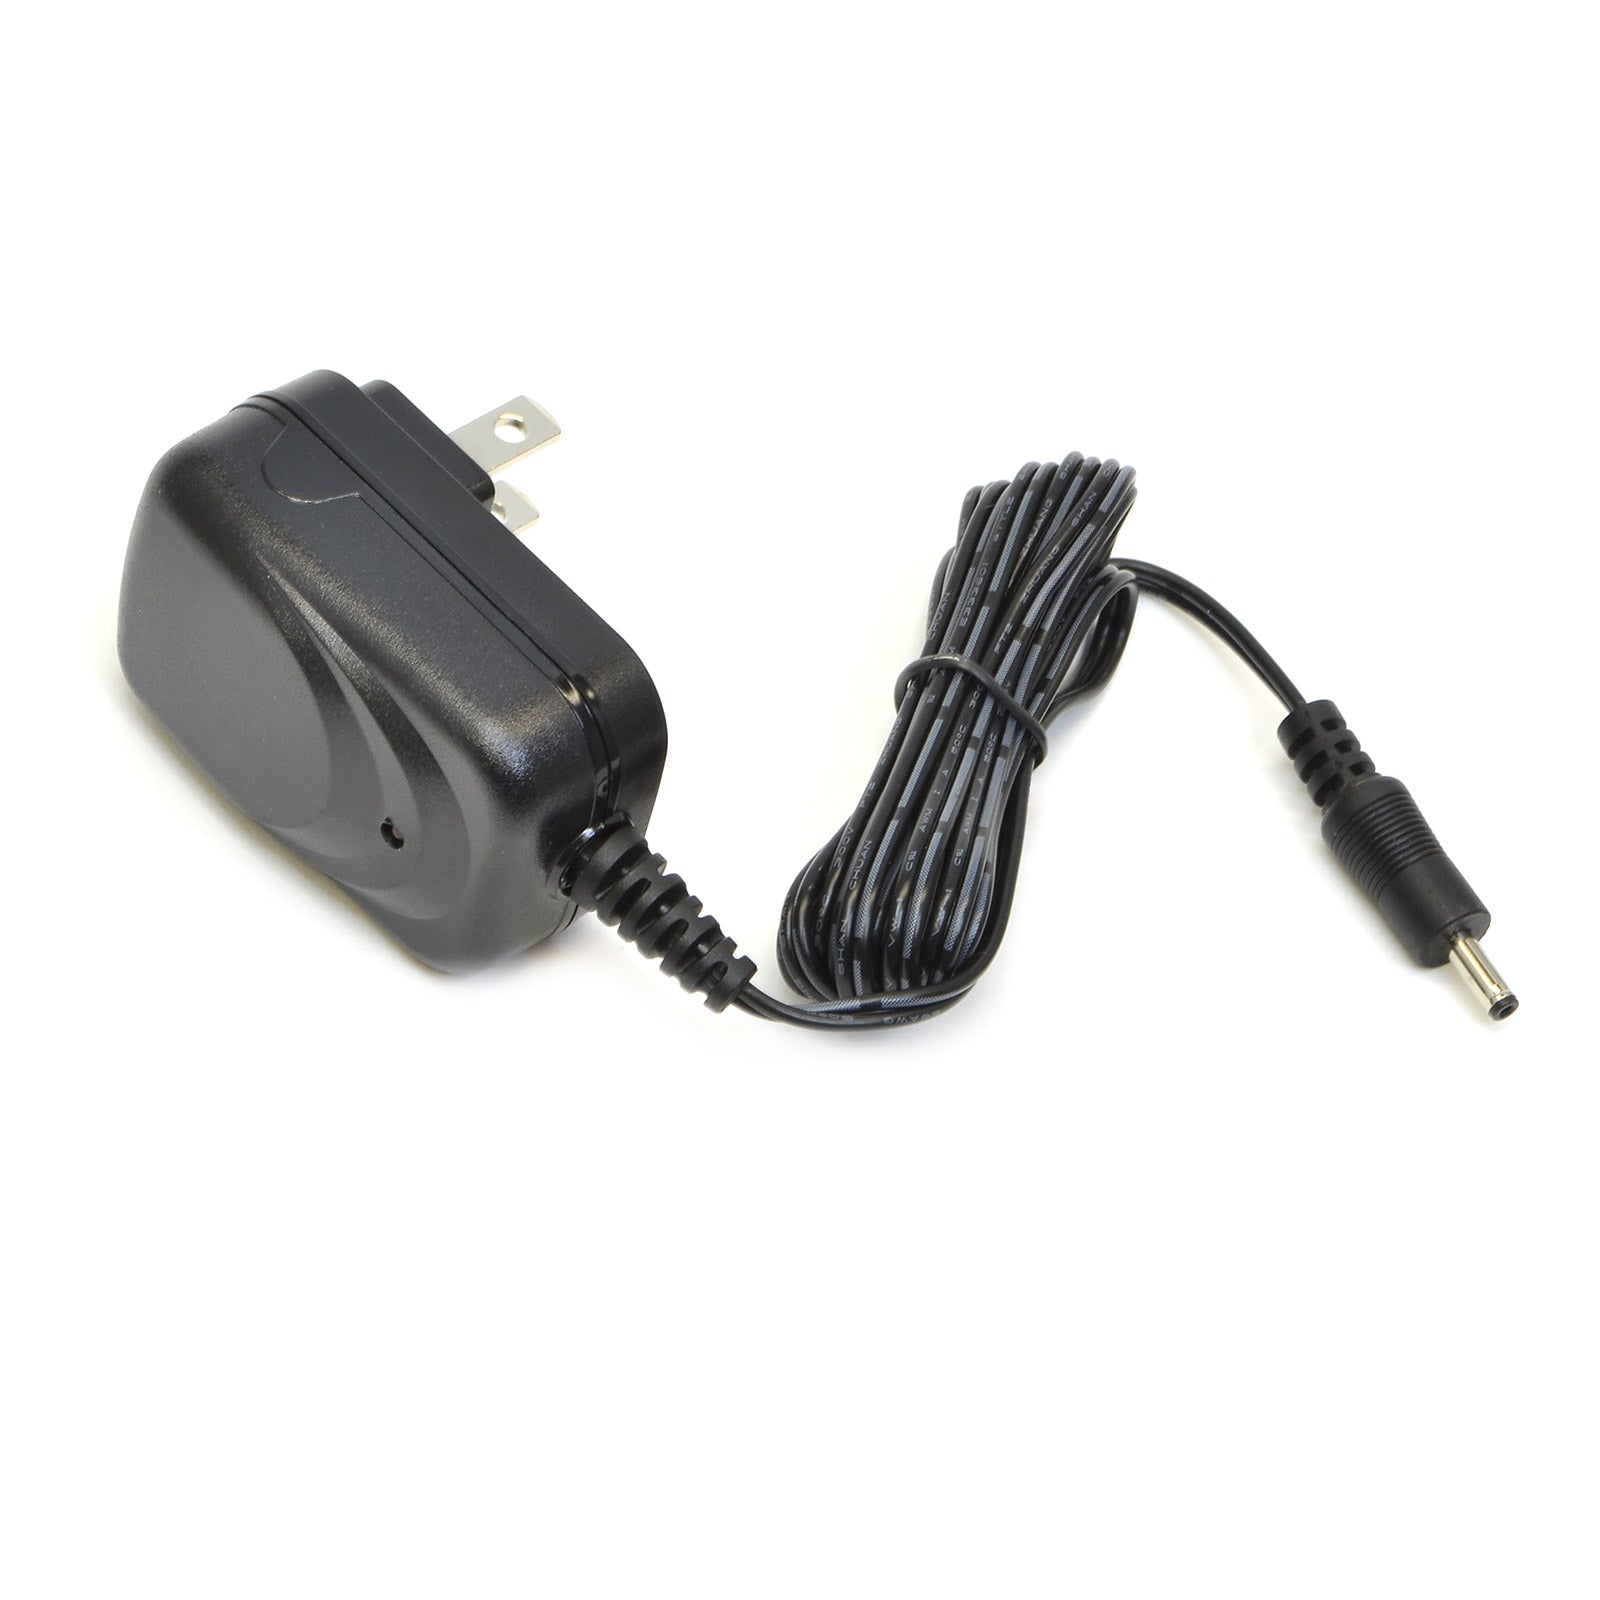 AC Adapter for Digital Remote Readouts by iGaging